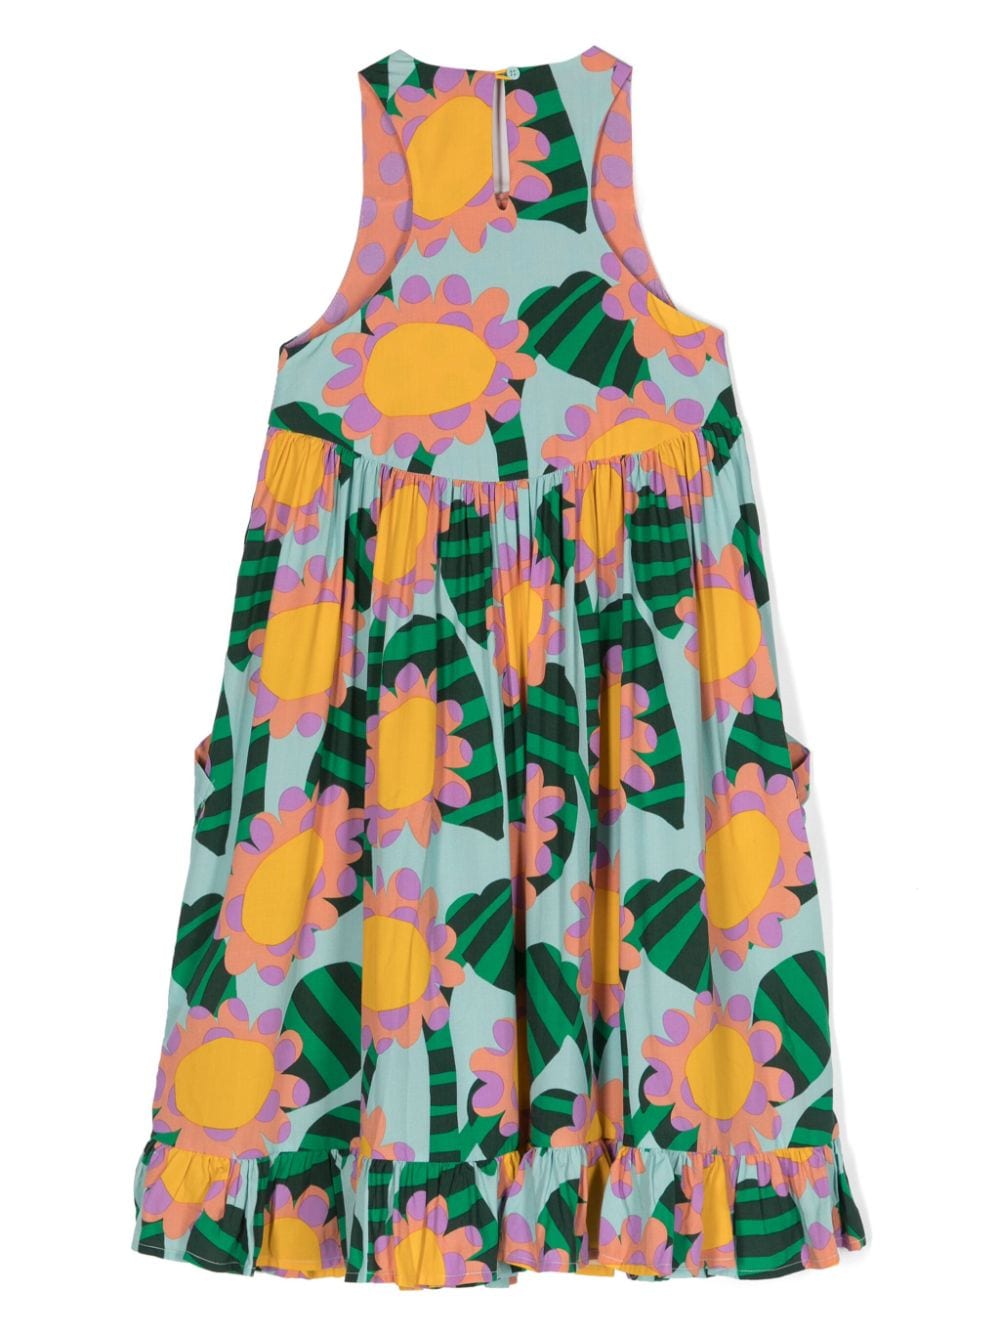 Multicolored dress for girls